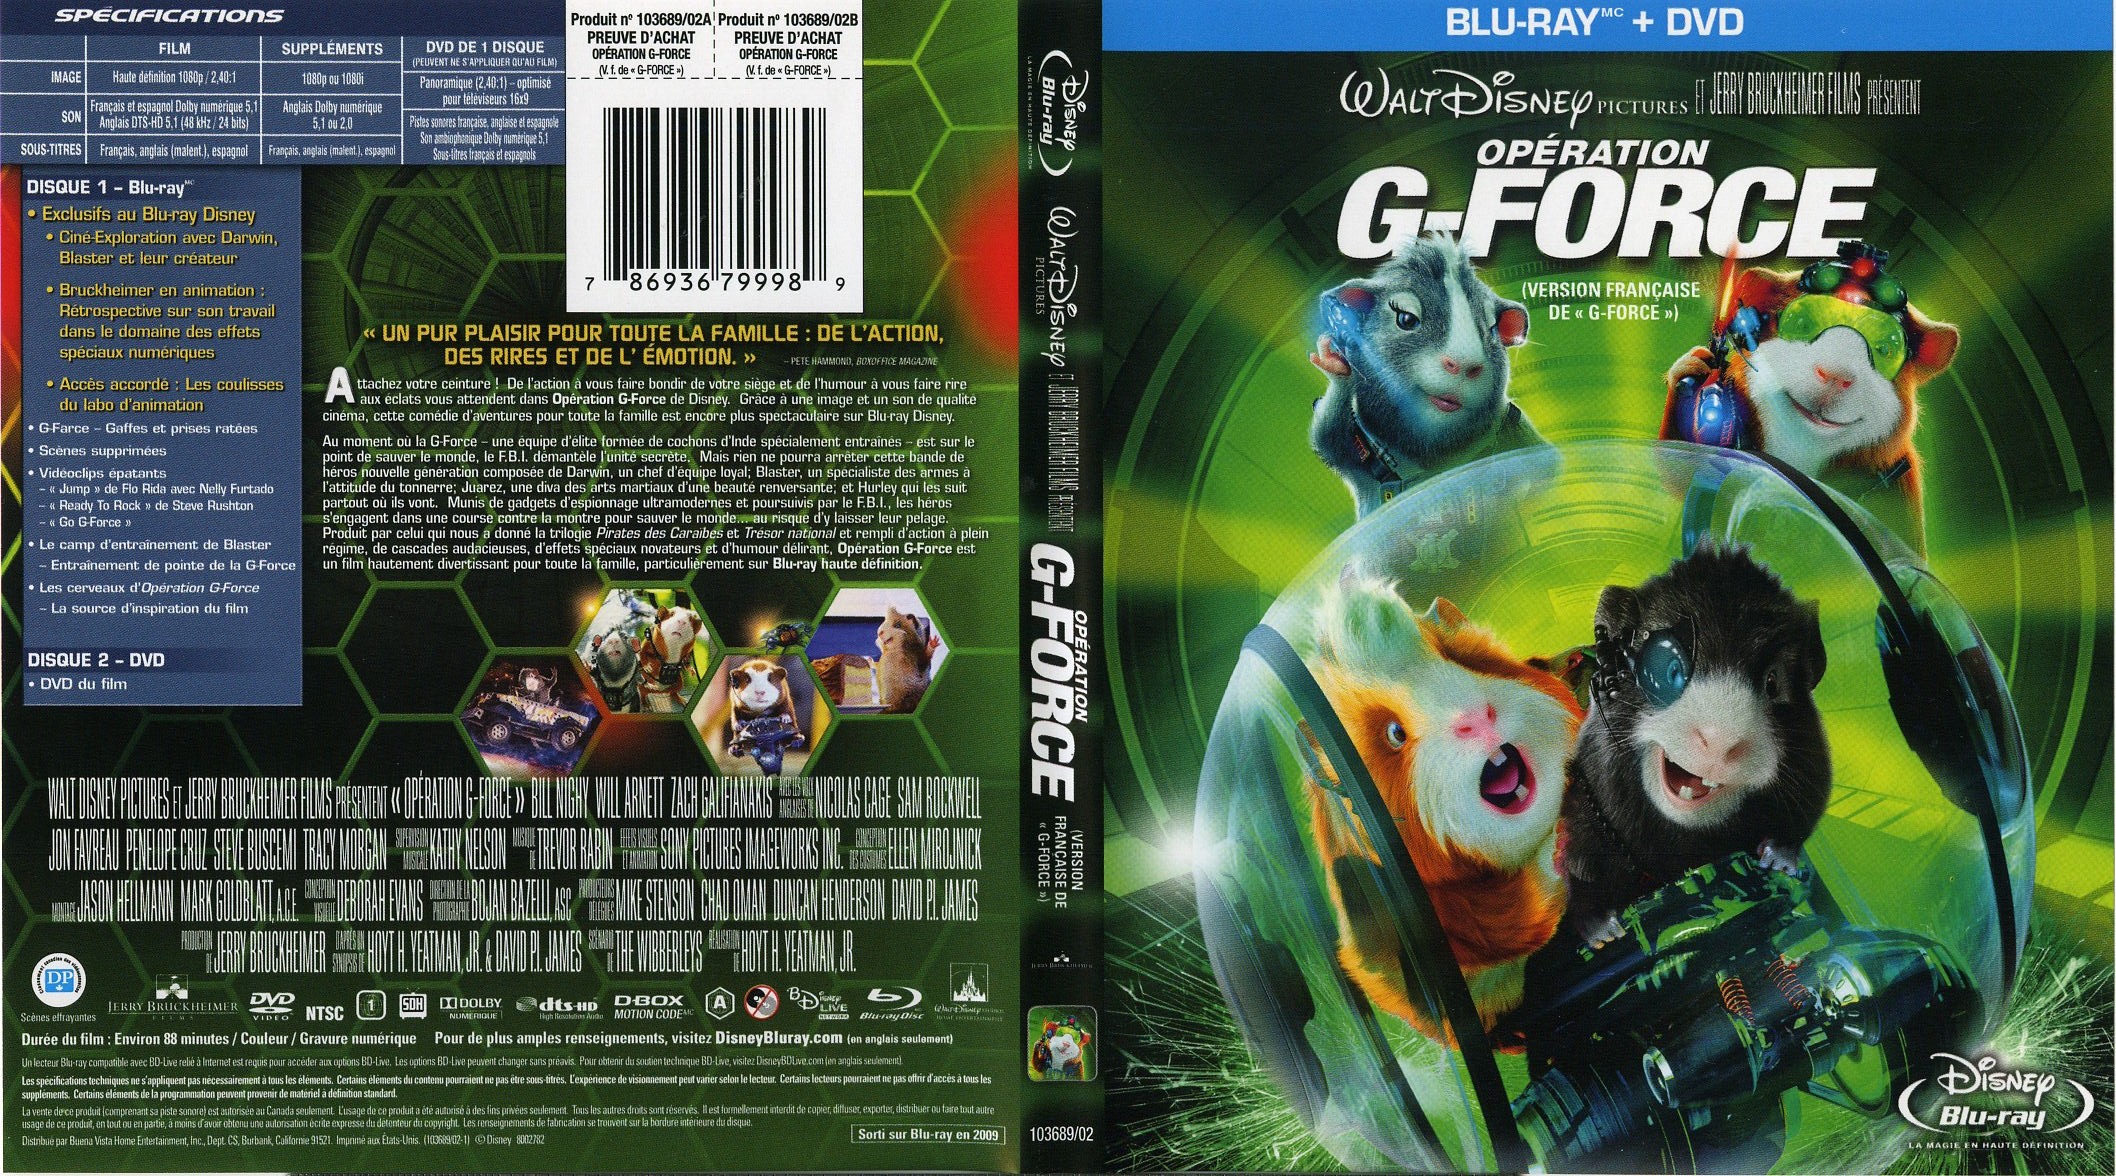 Jaquette DVD G-force (Canadienne) (BLU-RAY) v2